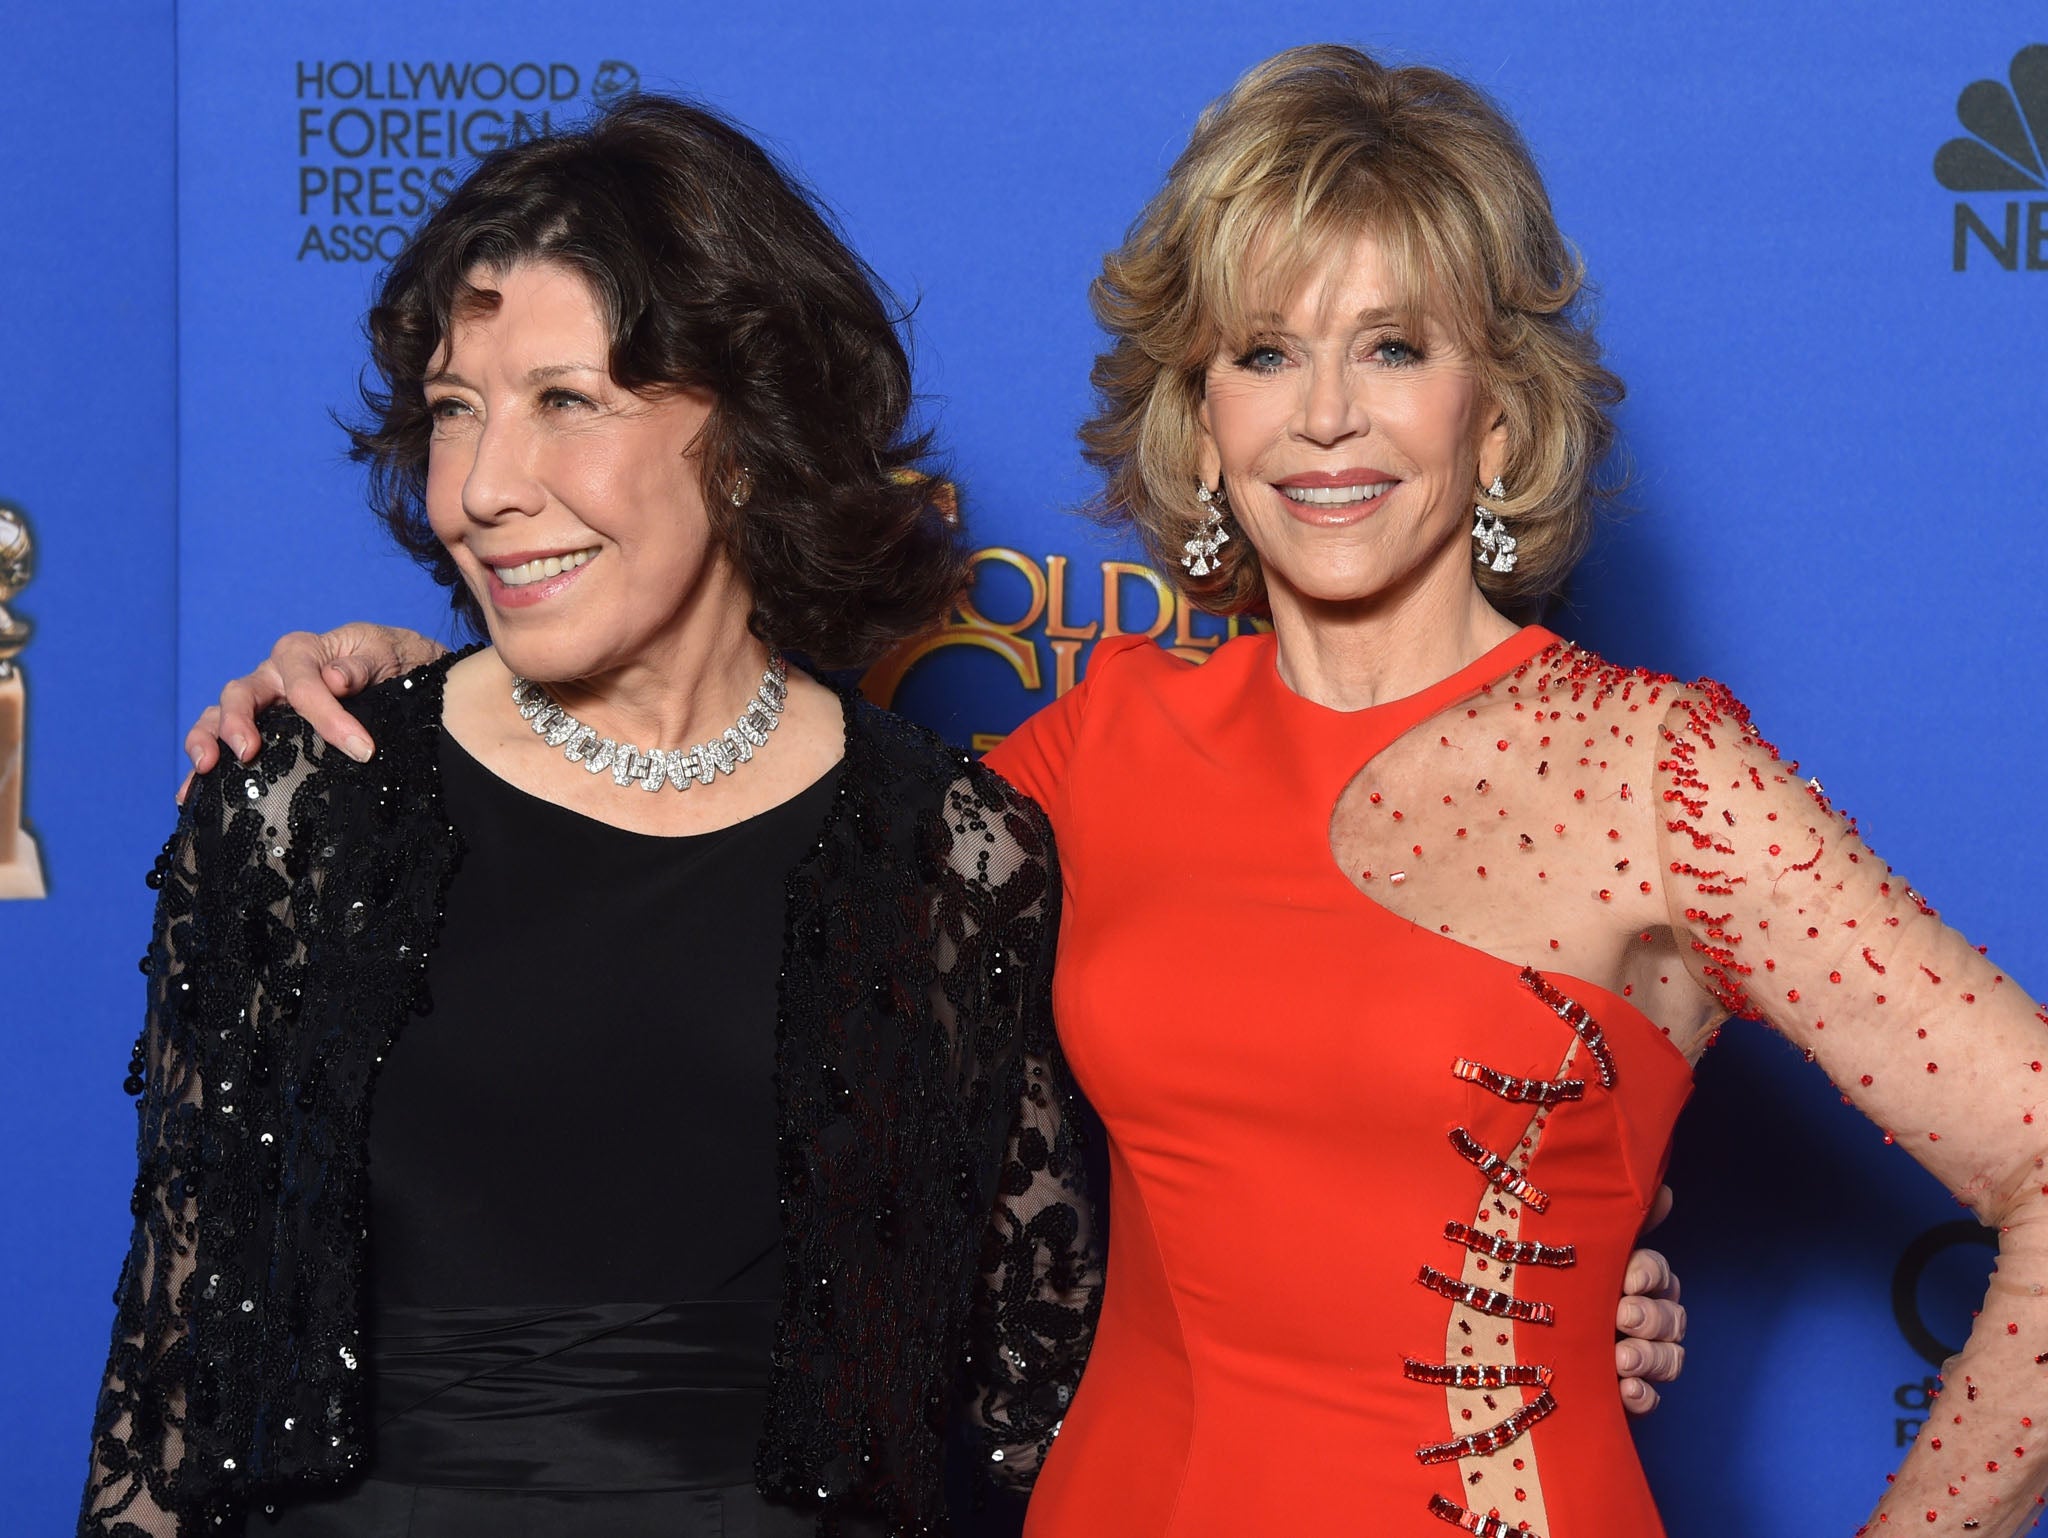 Lily Tomlin and Jane Fonda at the 72nd Annual Golden Globes ceremony in Los Angeles